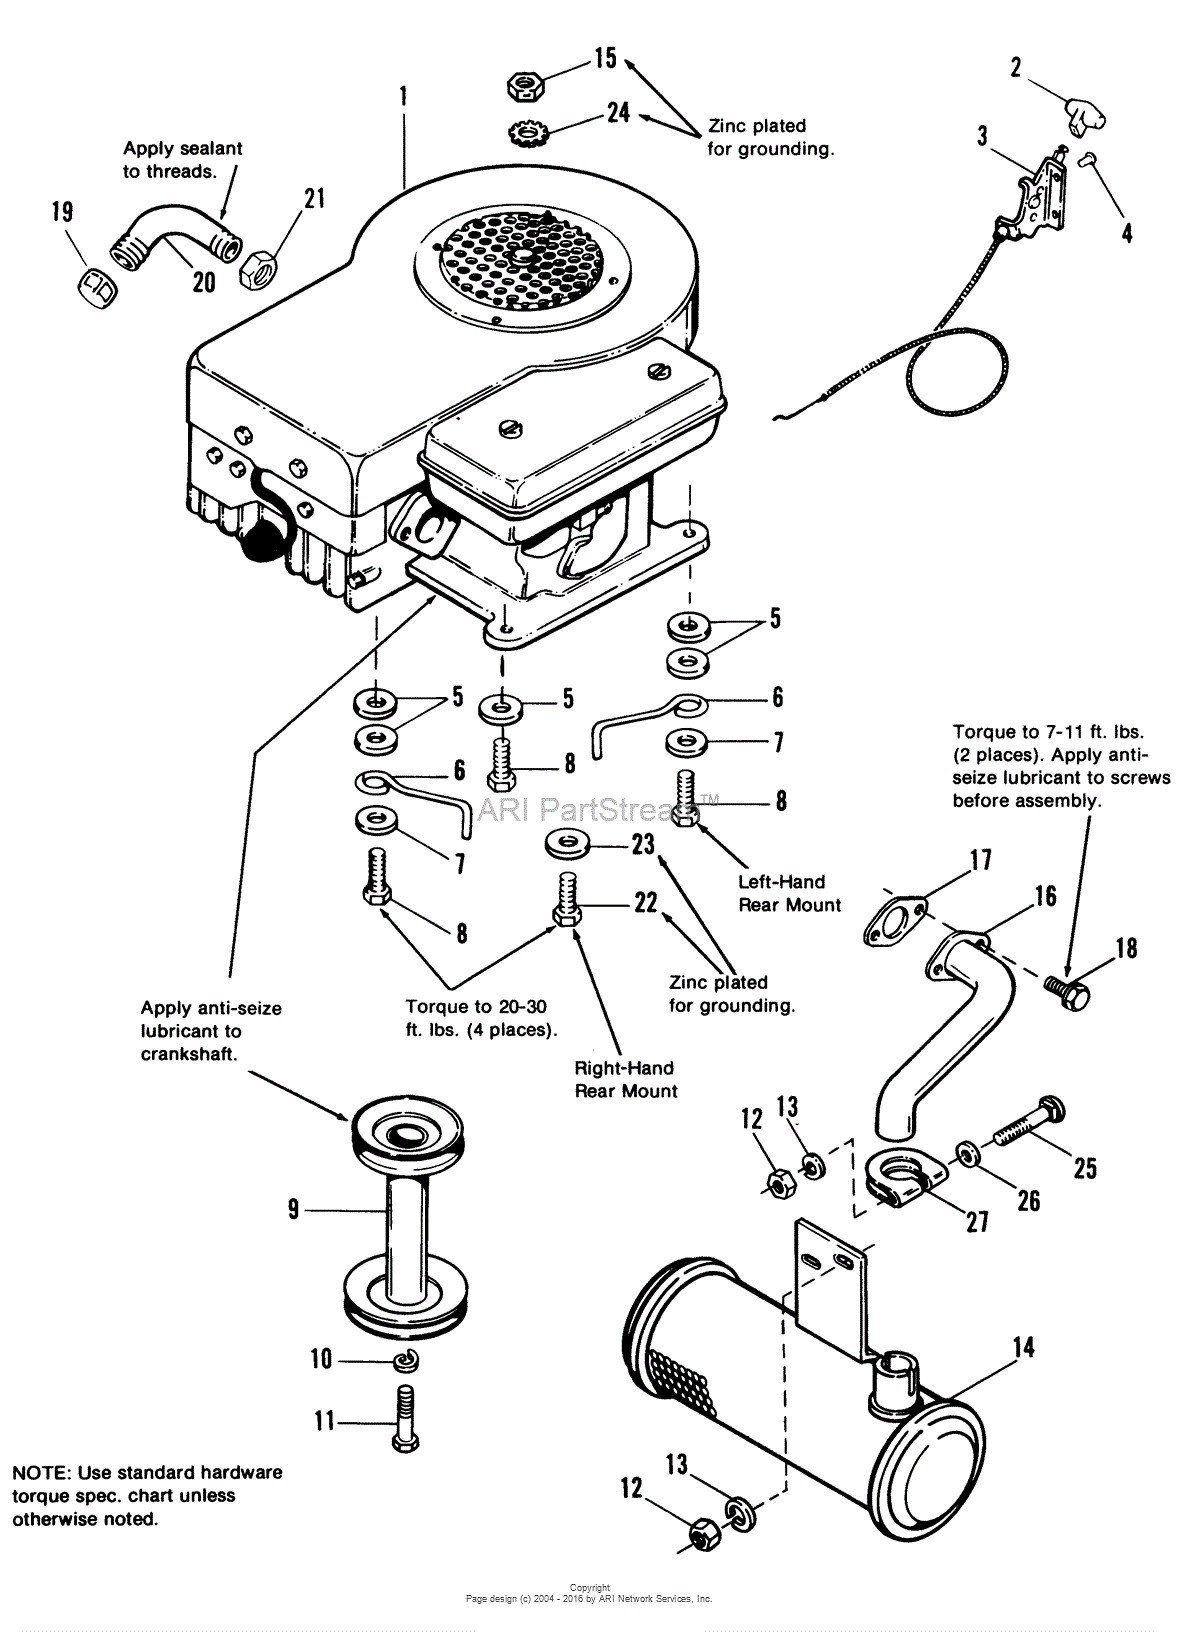 Diagram Of Lawn Mower Engine Simplicity 4212h 12 5hp B&s Tractor W Agrifab Parts Of Diagram Of Lawn Mower Engine